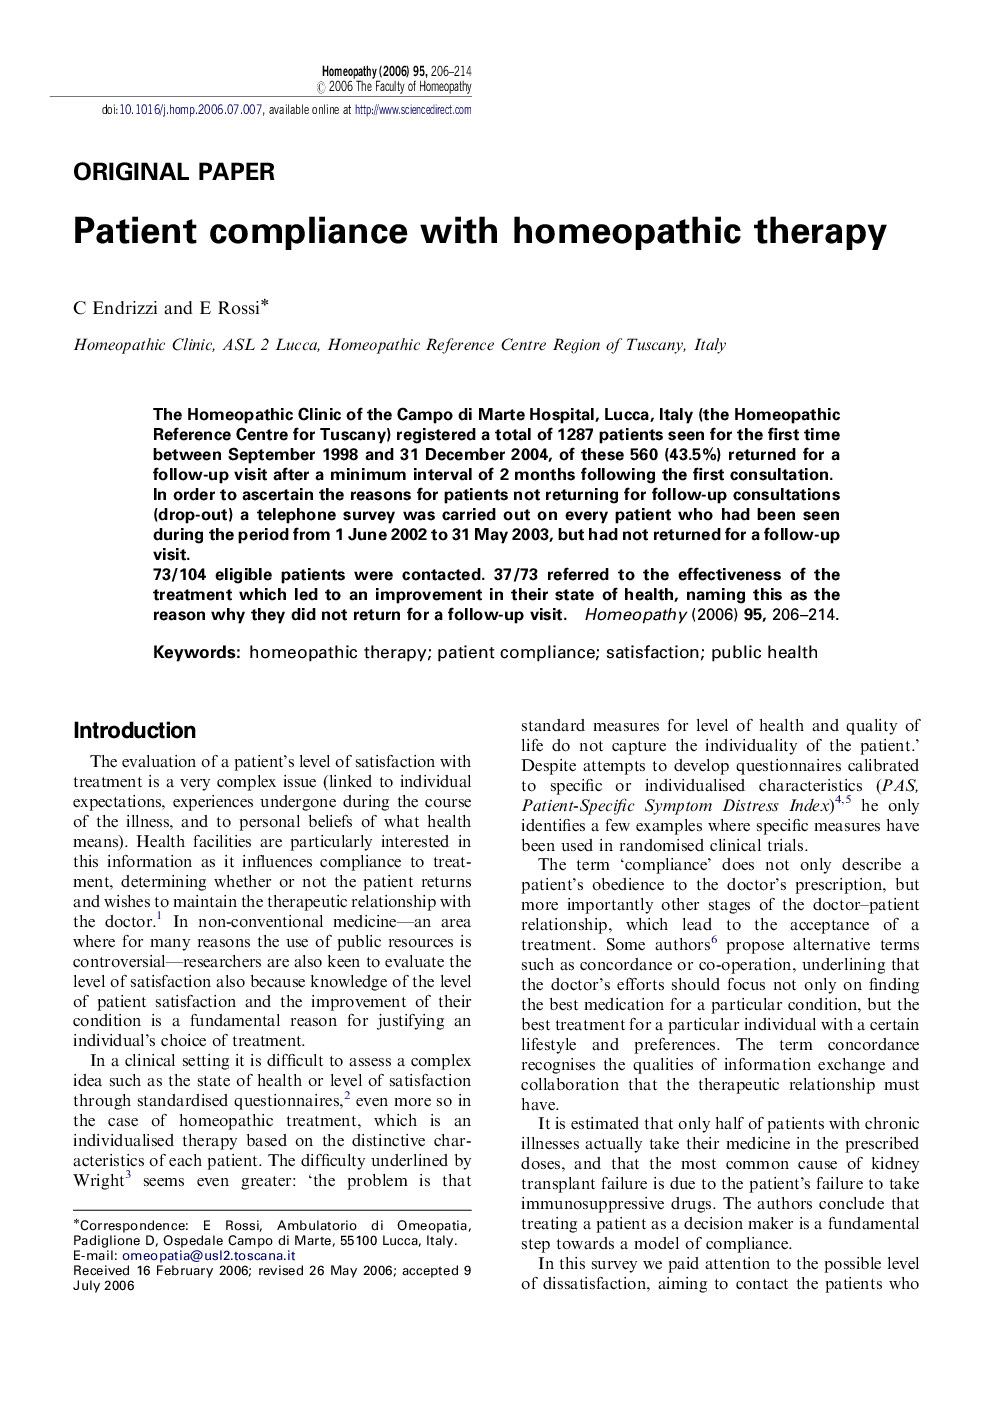 Patient compliance with homeopathic therapy